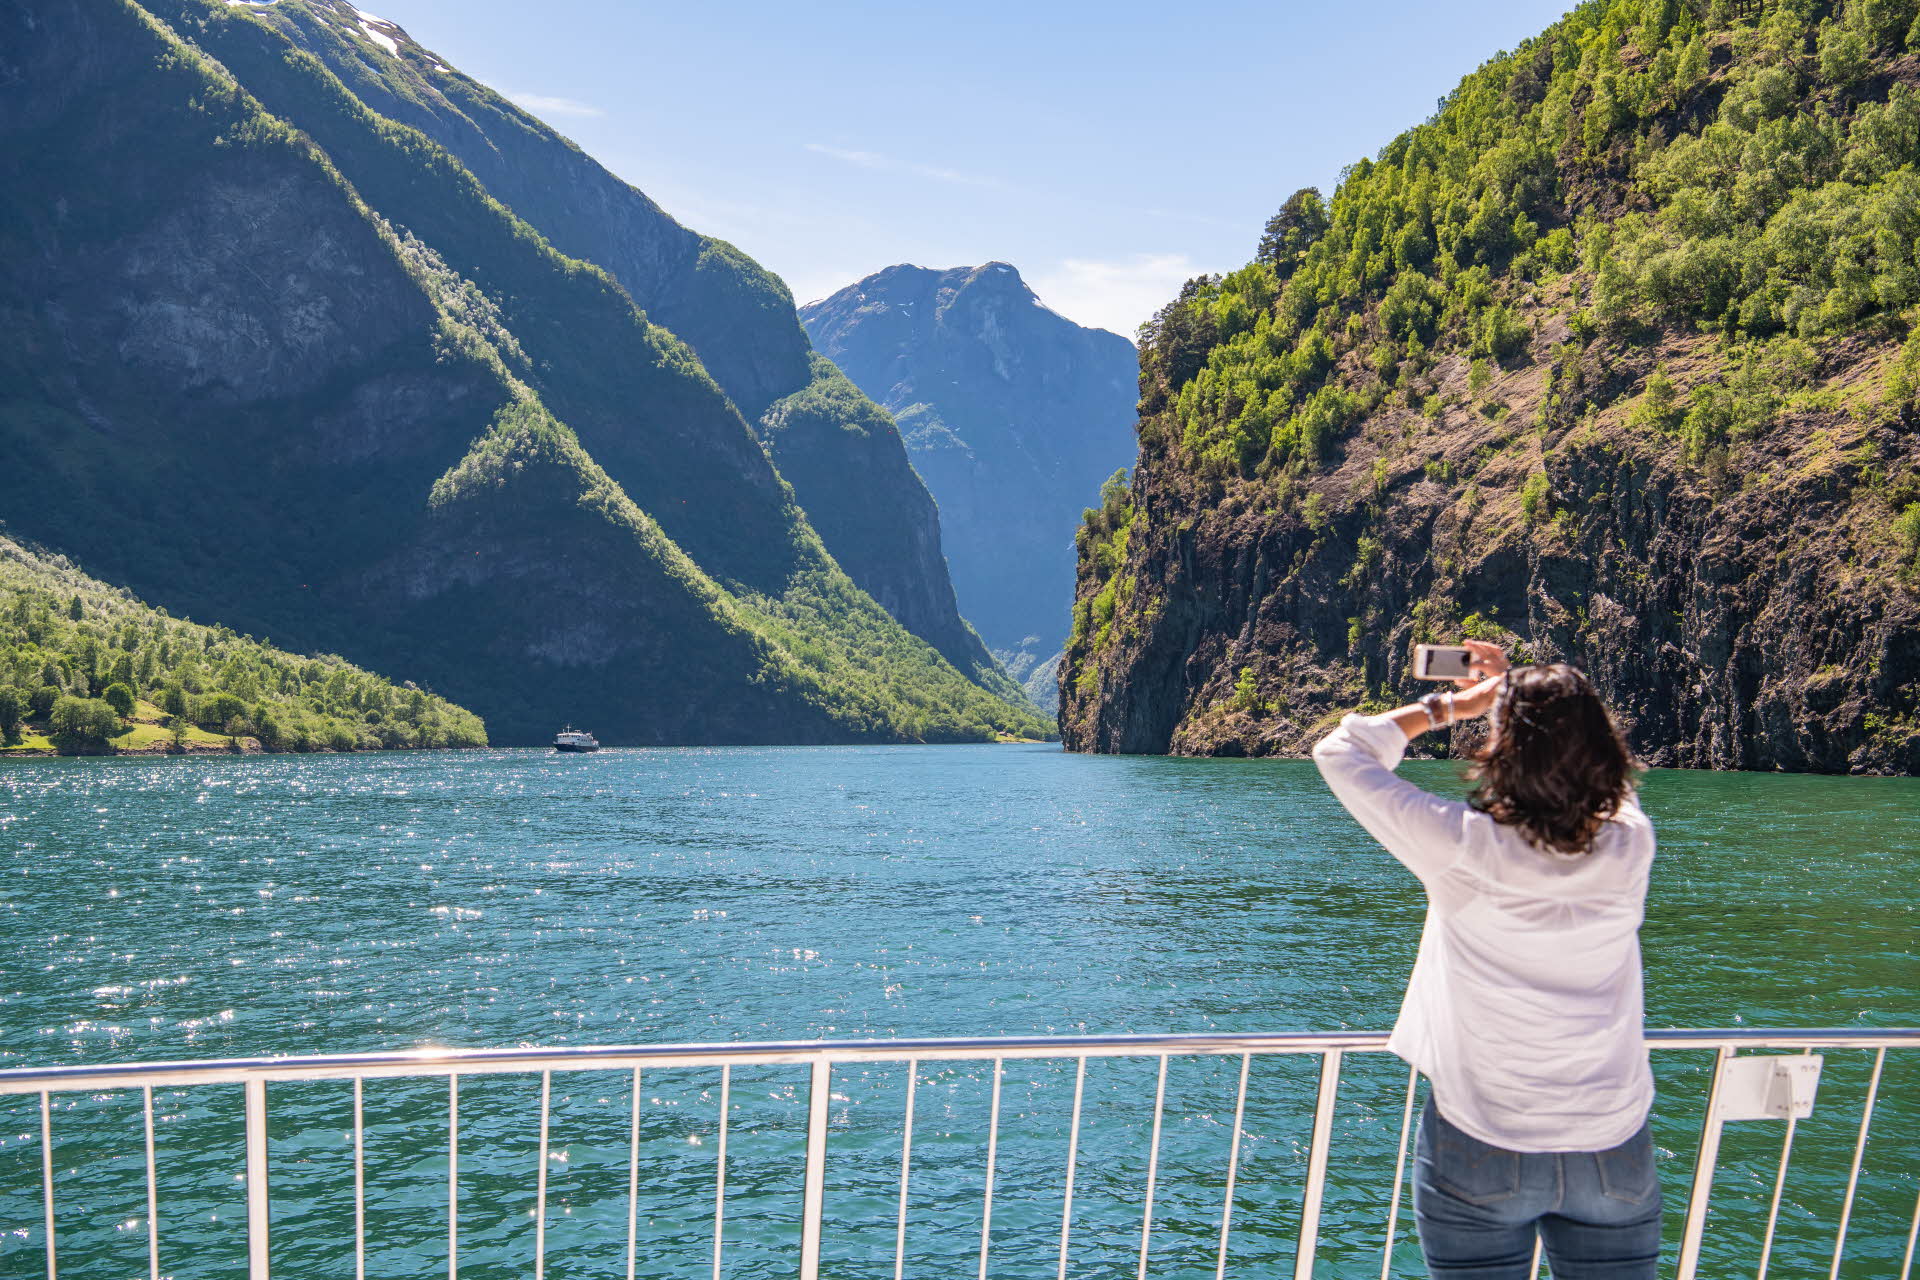 A lady taking a photo of the Nærøyfjord from the bow of the Future of the Fjords